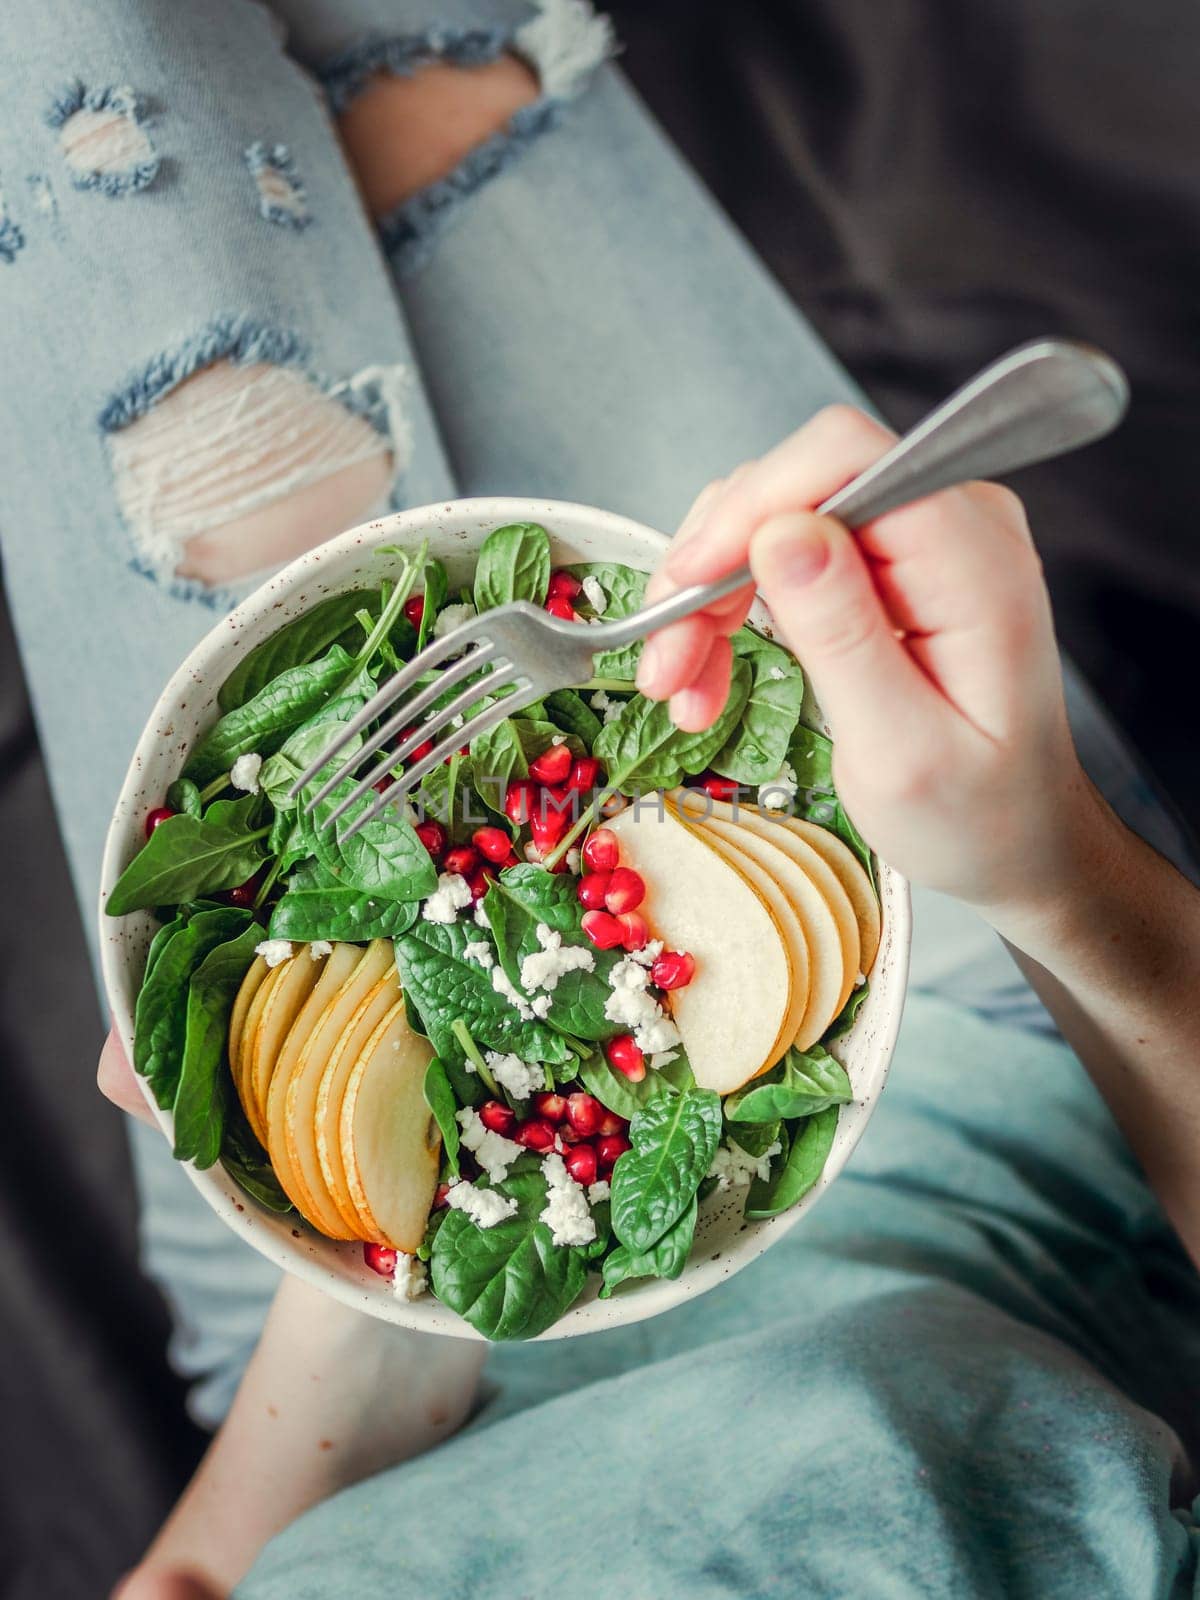 Woman in jeans holding vegan salad bowl with spinach, pear, pomegranate, cheese. Vegan breakfast, vegetarian food, diet concept. Girl in jeans holding fork with knees and hands visible